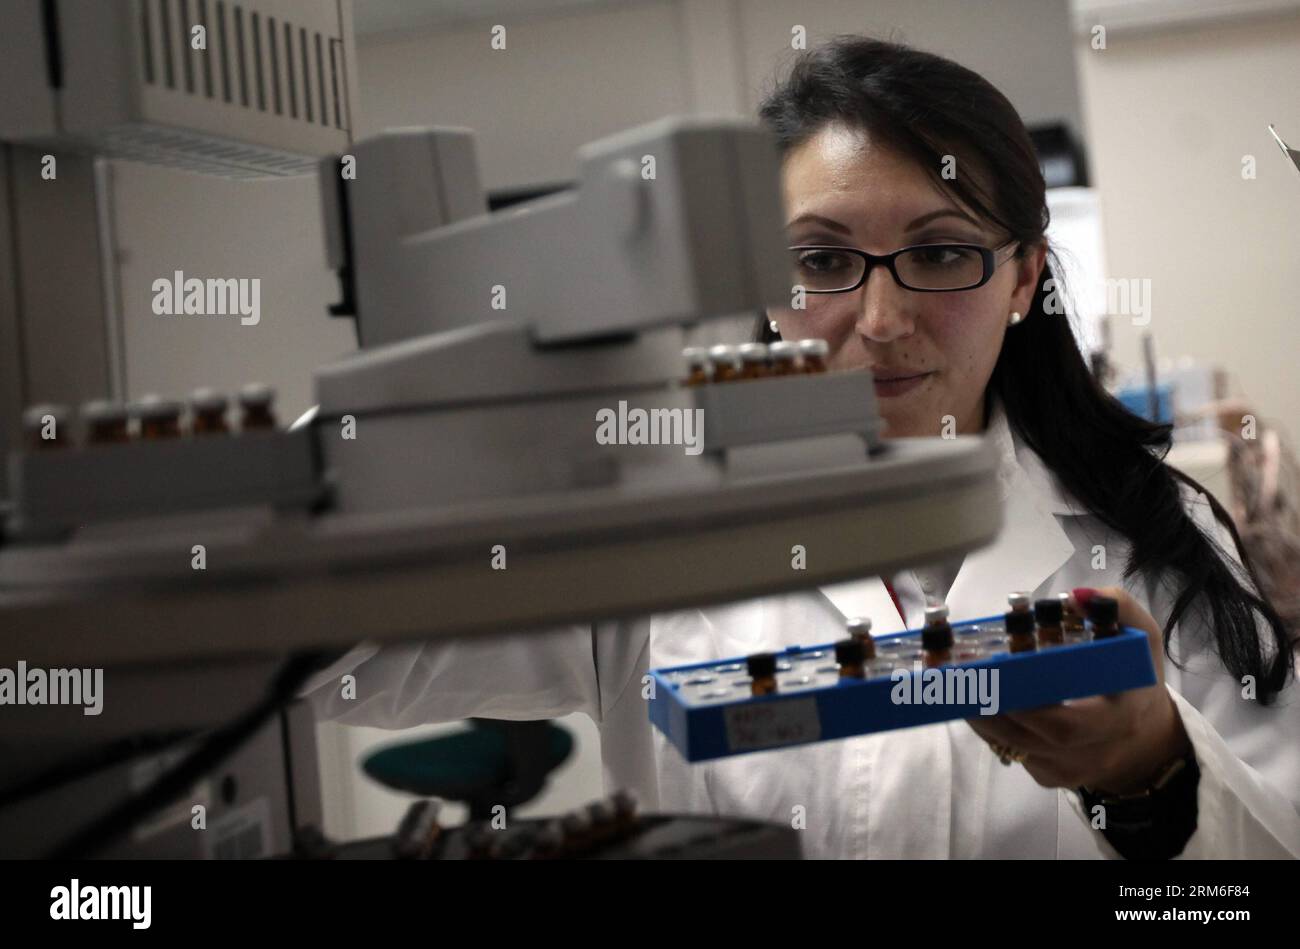 (140109) -- QUITO, Jan. 9, 2014 (Xinhua) -- A biochemist works in a laboratory of quality control, in Quito, capital of Ecuador, on Jan. 9, 2014. The Public Municipal Company of Potable Water and Sanitation of Quito (EPMAPS, for its acronym in Spanish), has implemented various quality controls to accomplish the parameters demanded by the control organizations, like training water testers in Ecuador, who can distinguish the flavors of water to offer a quality service of potable water for citizens of the Ecuadorian capital. (Xinhua/Santiago Armas) ECUADOR-QUITO-TECHNOLOGY-WATER PUBLICATIONxNOTxI Stock Photo